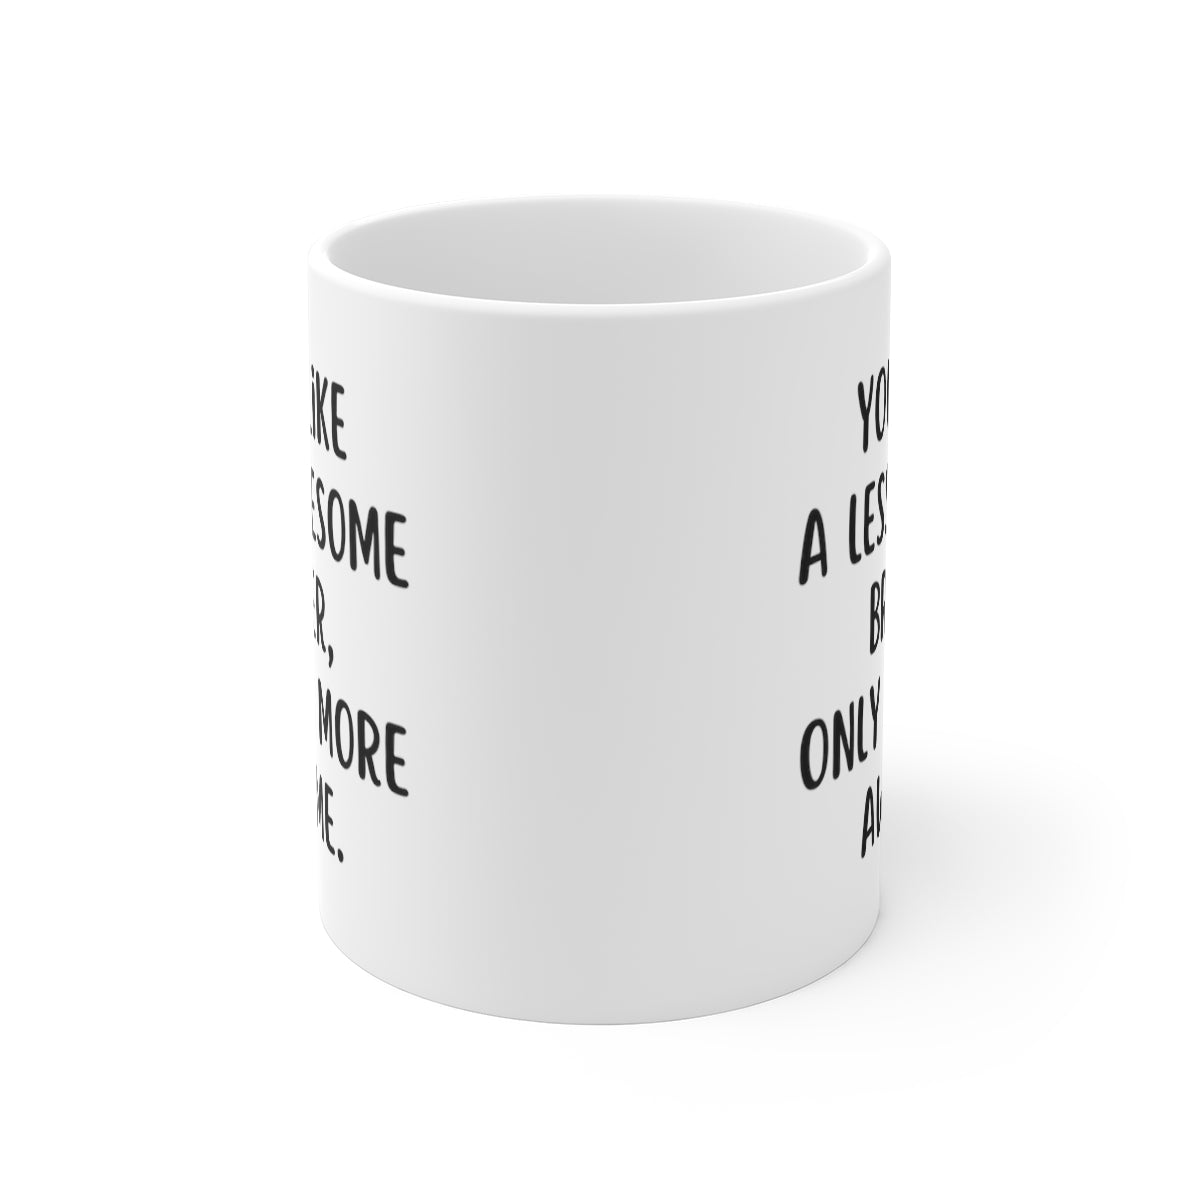 You're Like A Less Awesome Brother, Only Way More Awesome | Funny, Snarky Gift | White Ceramic Mug, Fun Block Font